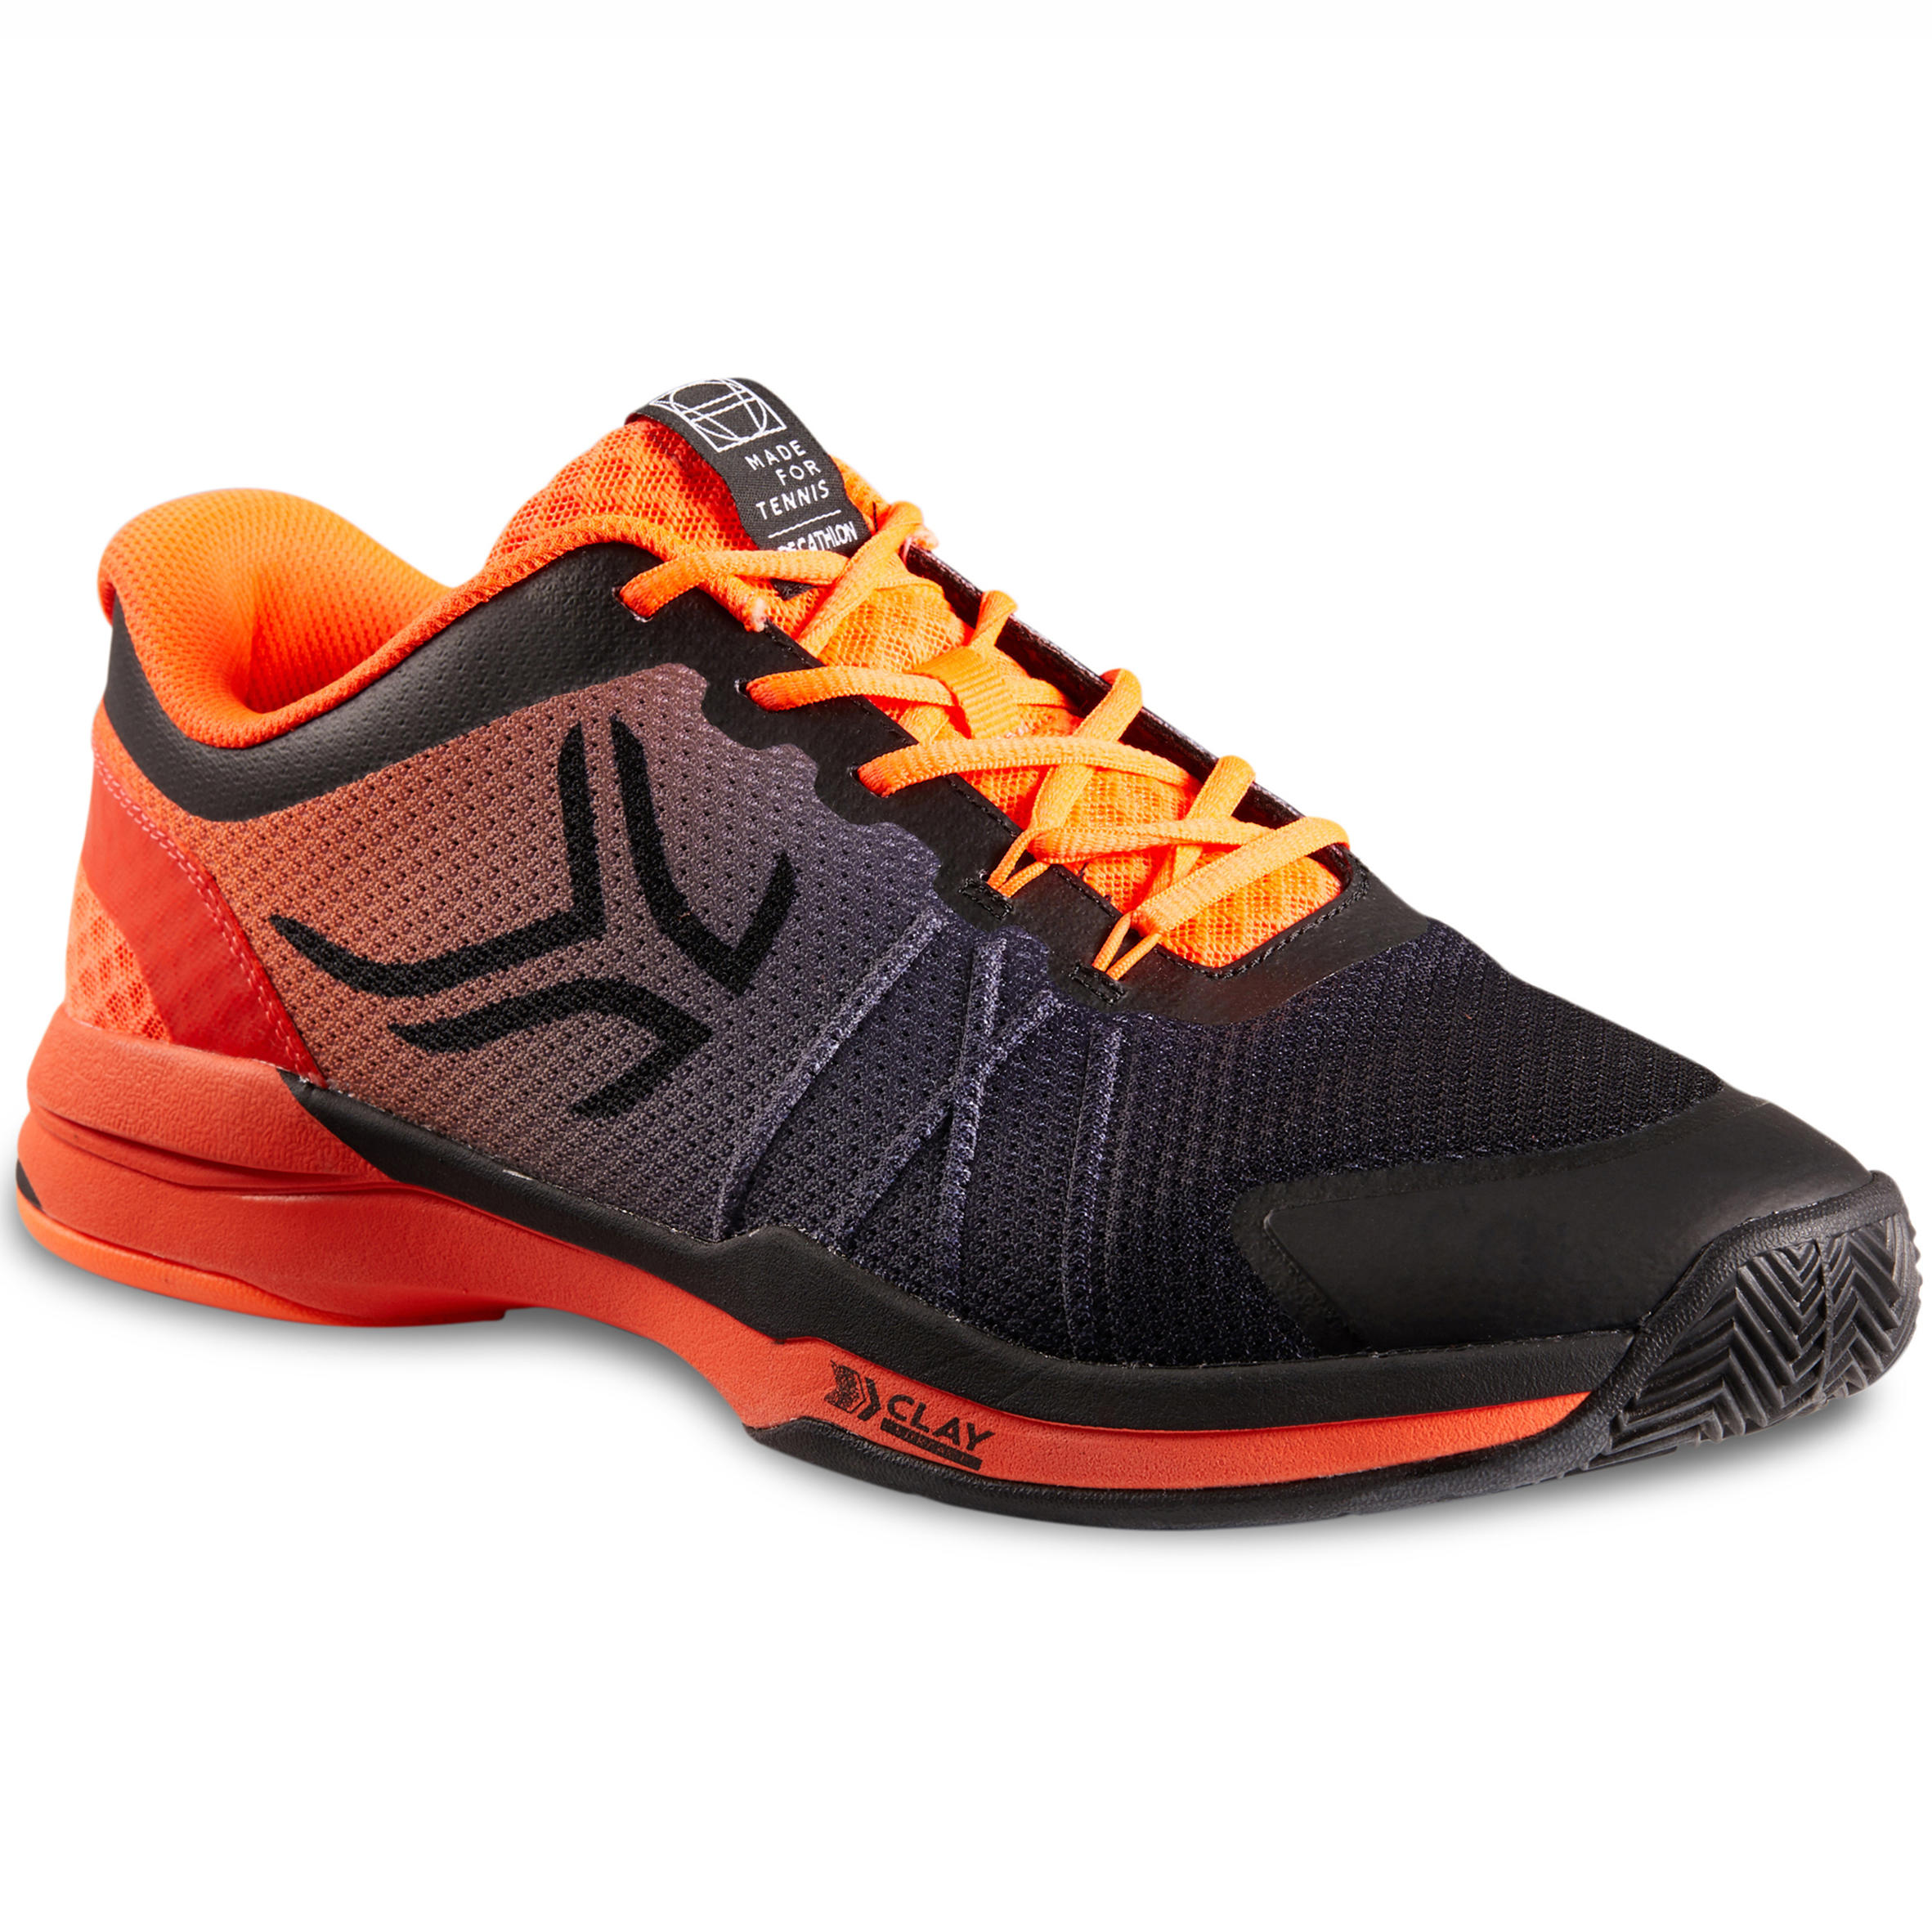 clay court tennis shoes mens